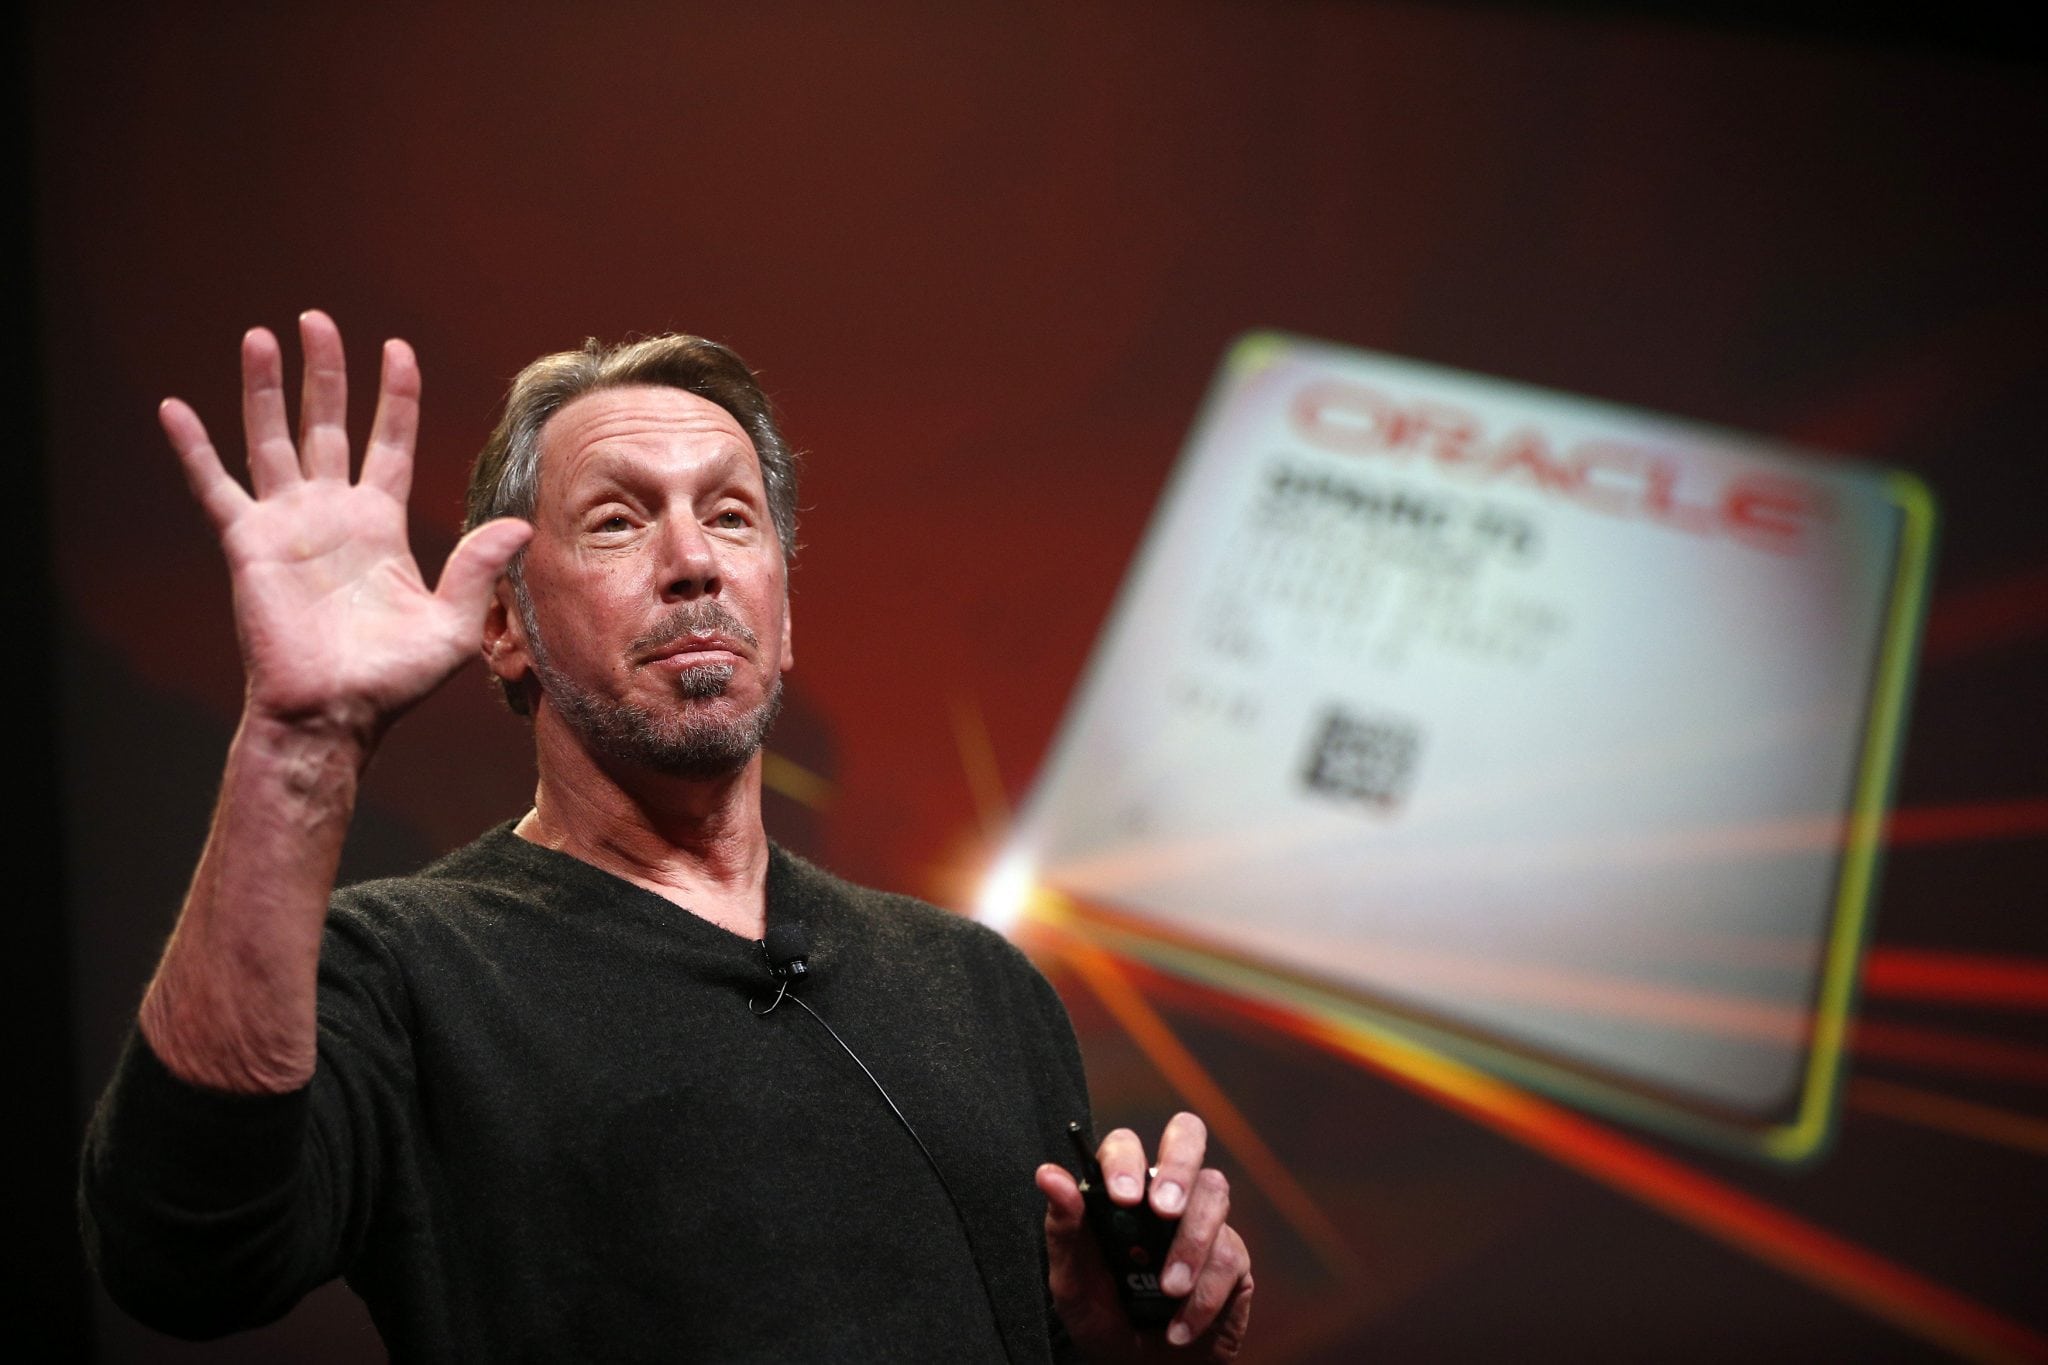 CEO of Oracle Corp, Larry Ellison introduces the company's latest SPARC servers at Oracle Conference Center in Redwood Shores, California March 26, 2013.